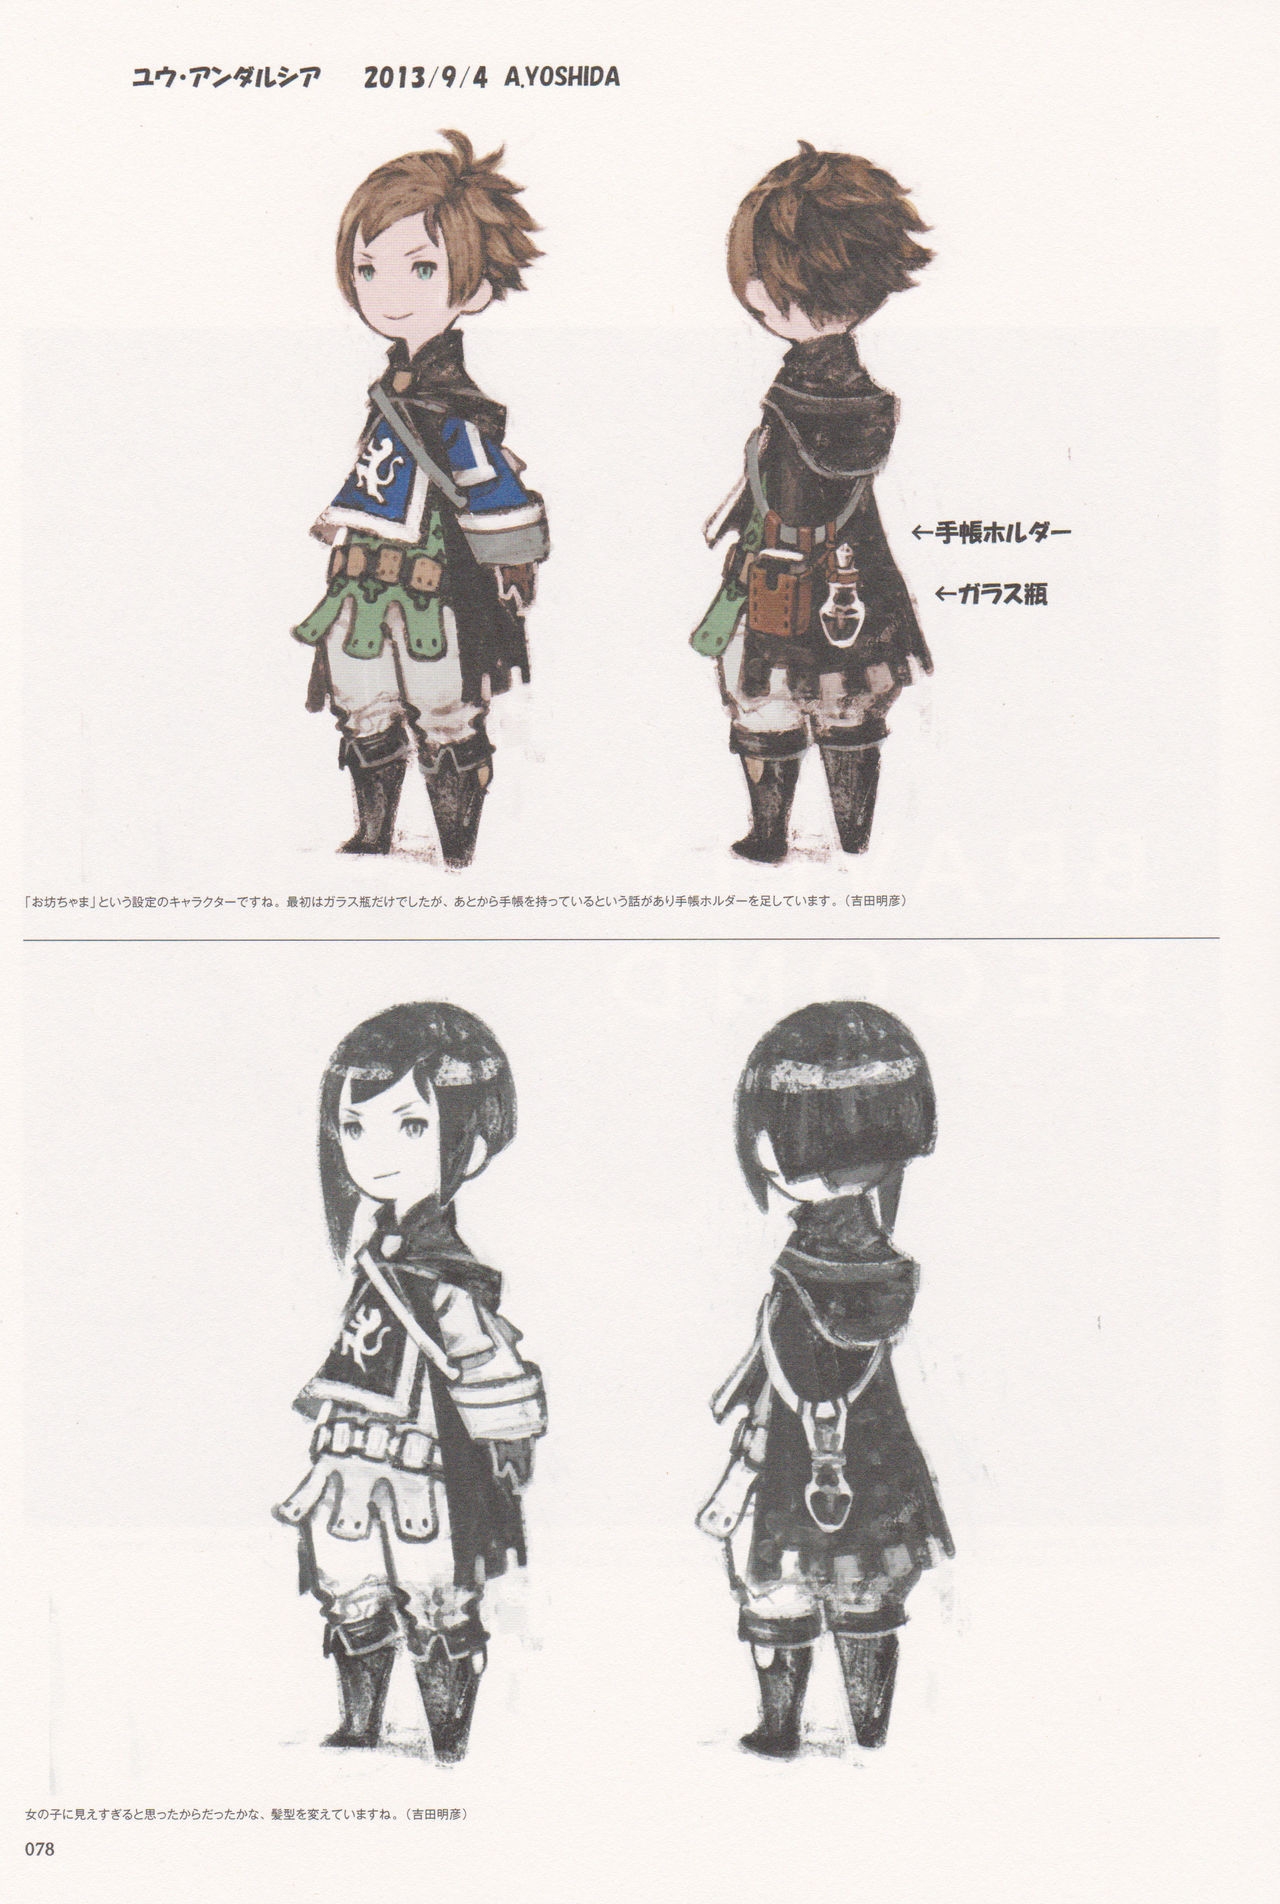 Bravely Second - End Layer - Design Works THE ART OF BRAVELY 2013-2015 78